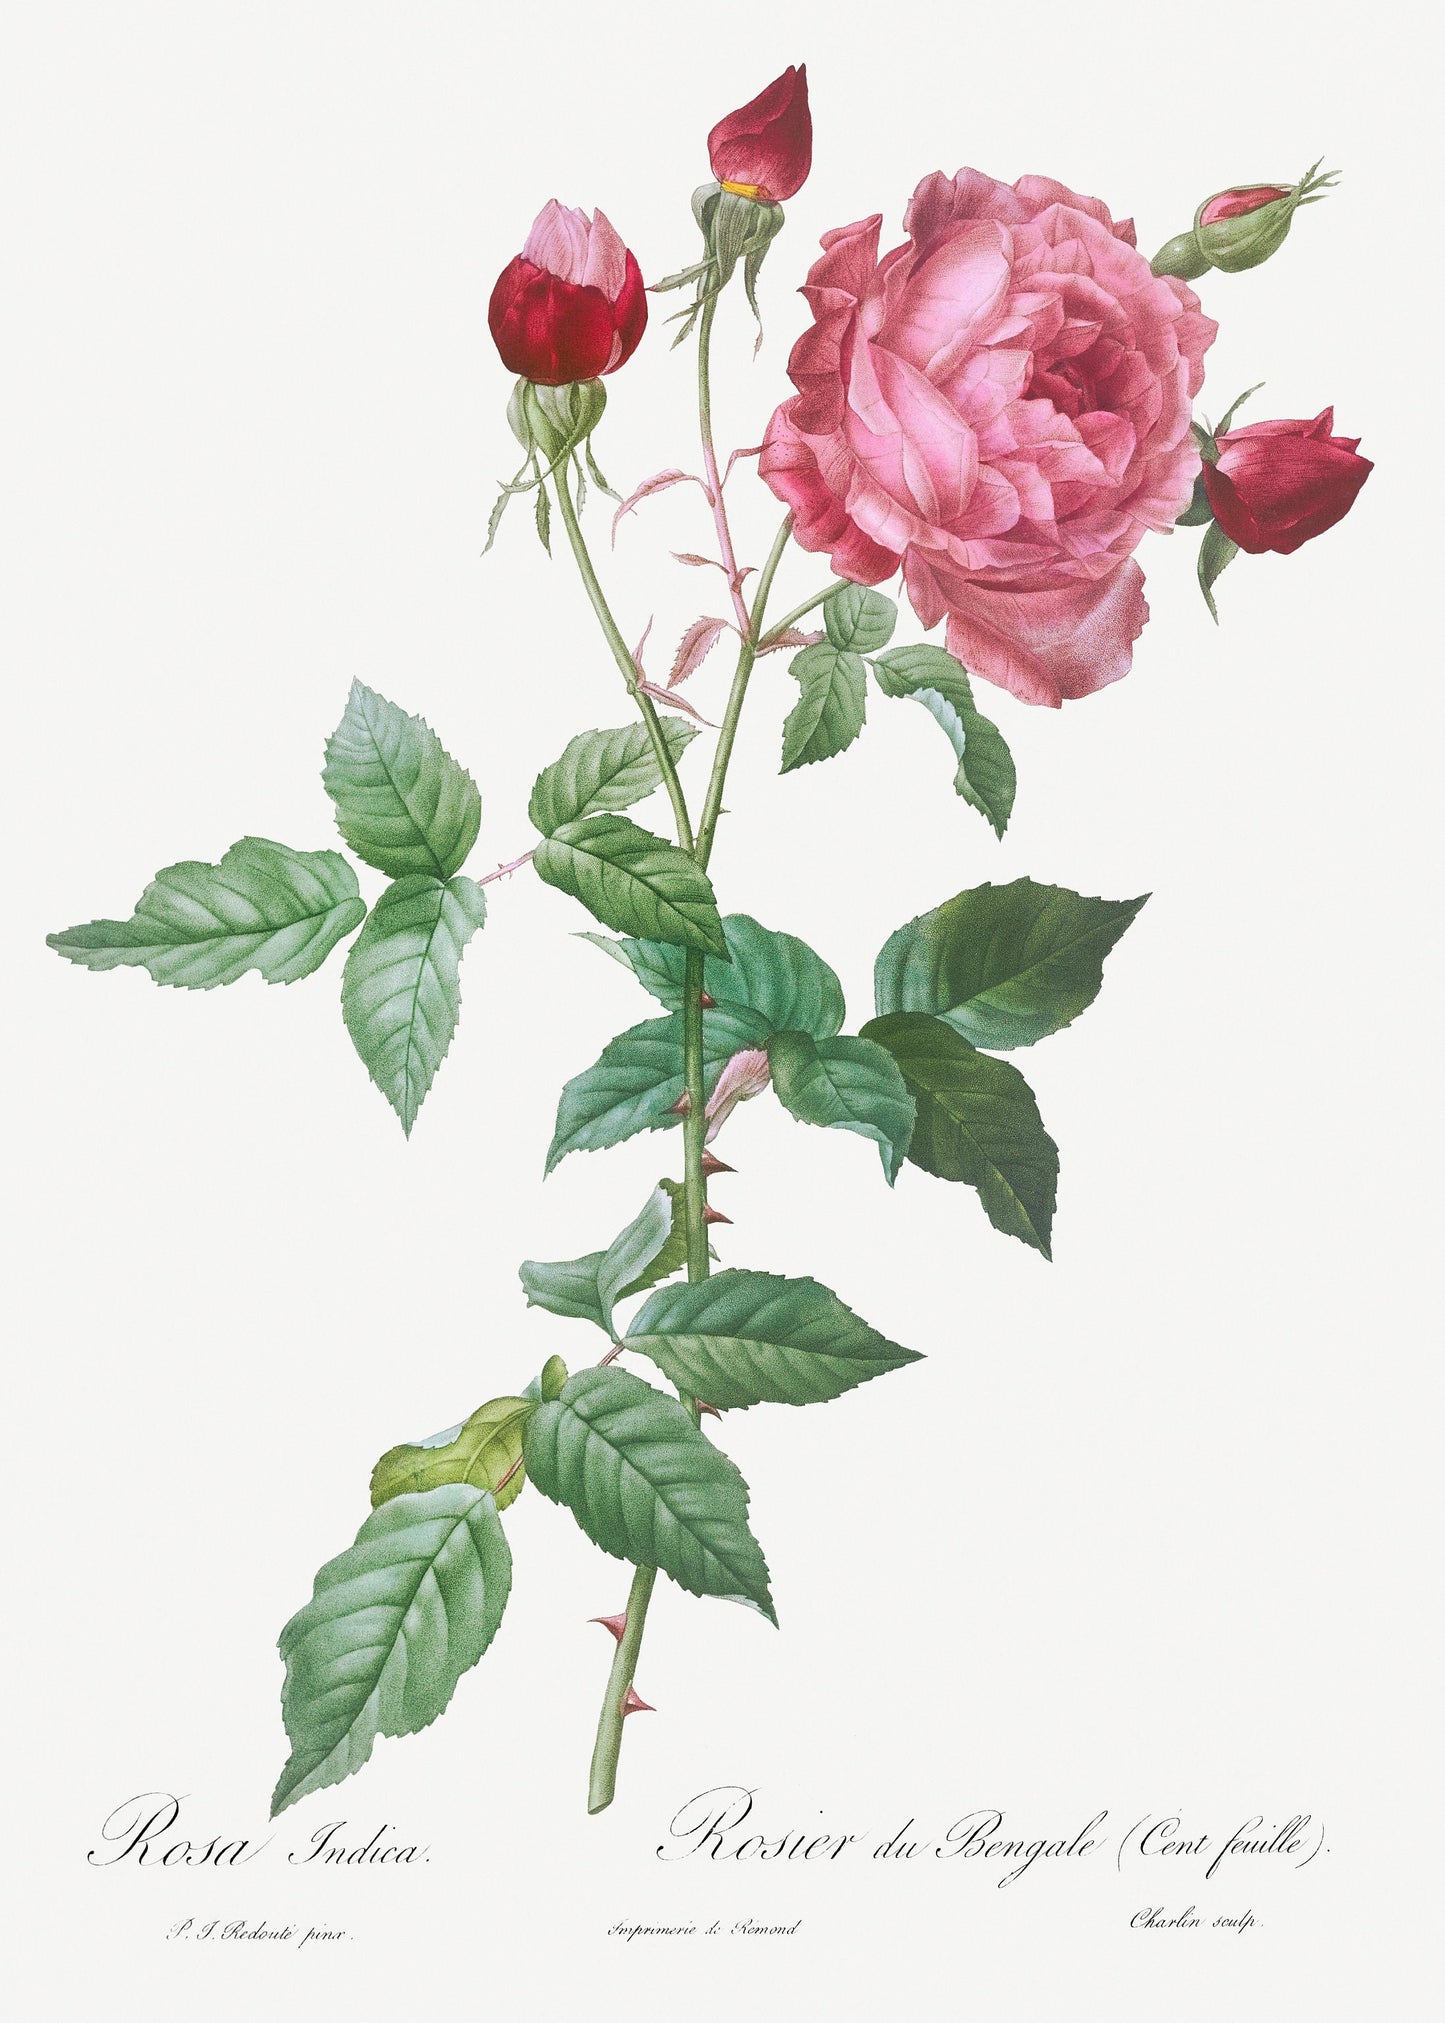 Pierre Joseph Redoute The Roses Set 2 [56 Images]